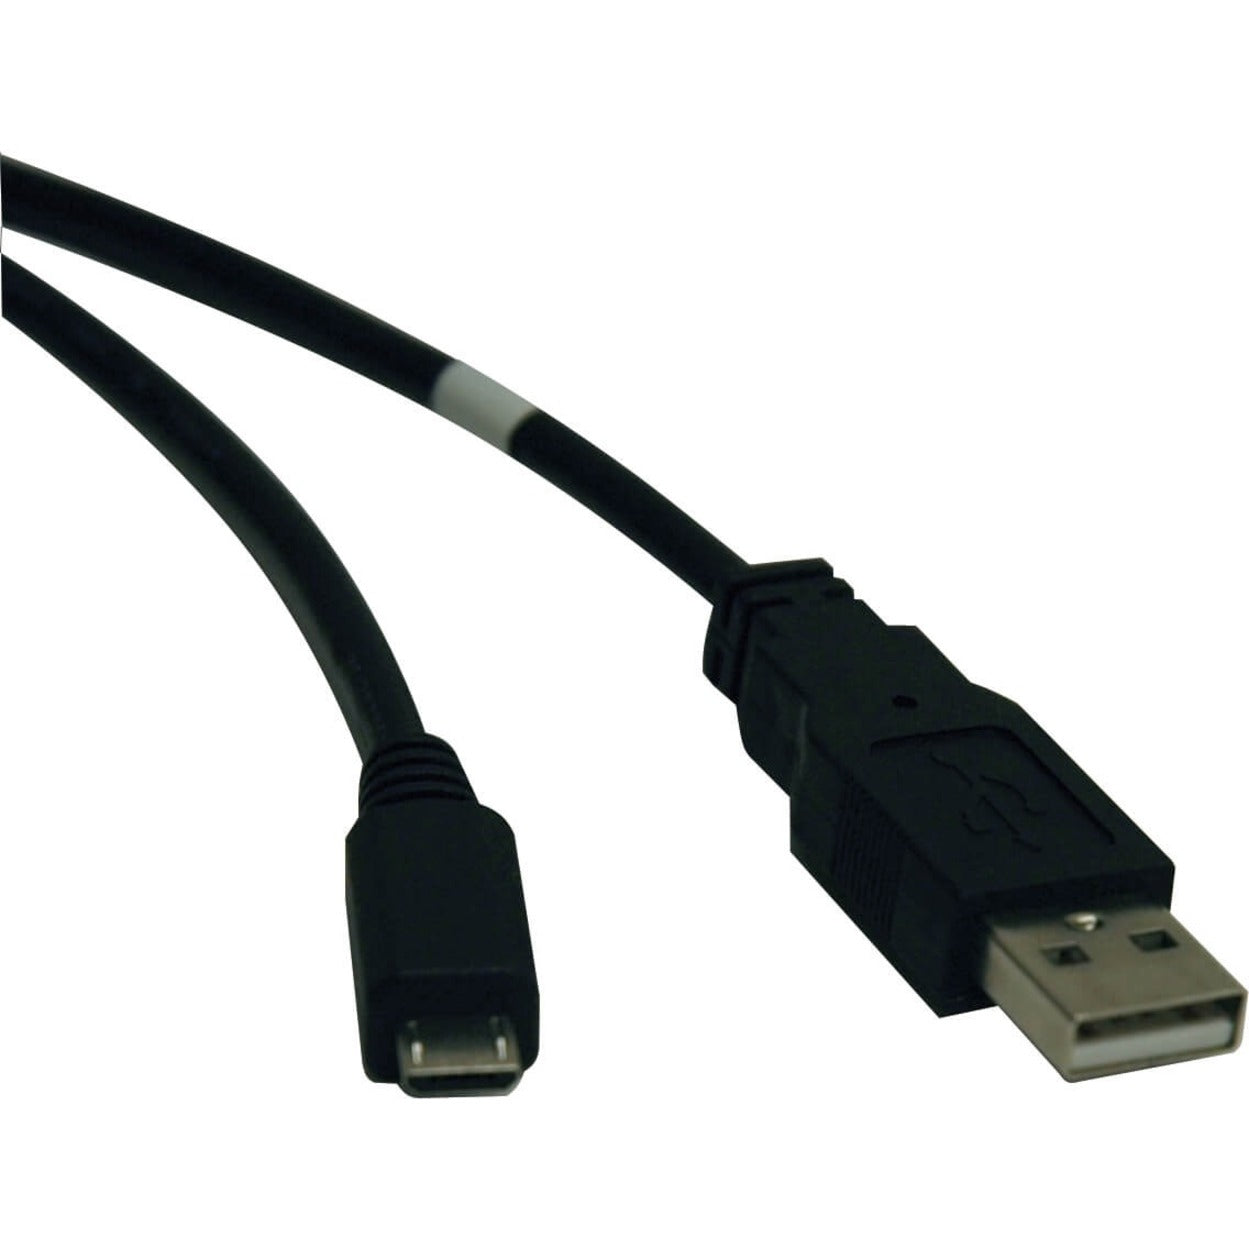 Tripp Lite U050-003 USB to Micro-USB Cable, 3 ft, 480Mbps Data Transfer, Durable and Efficient